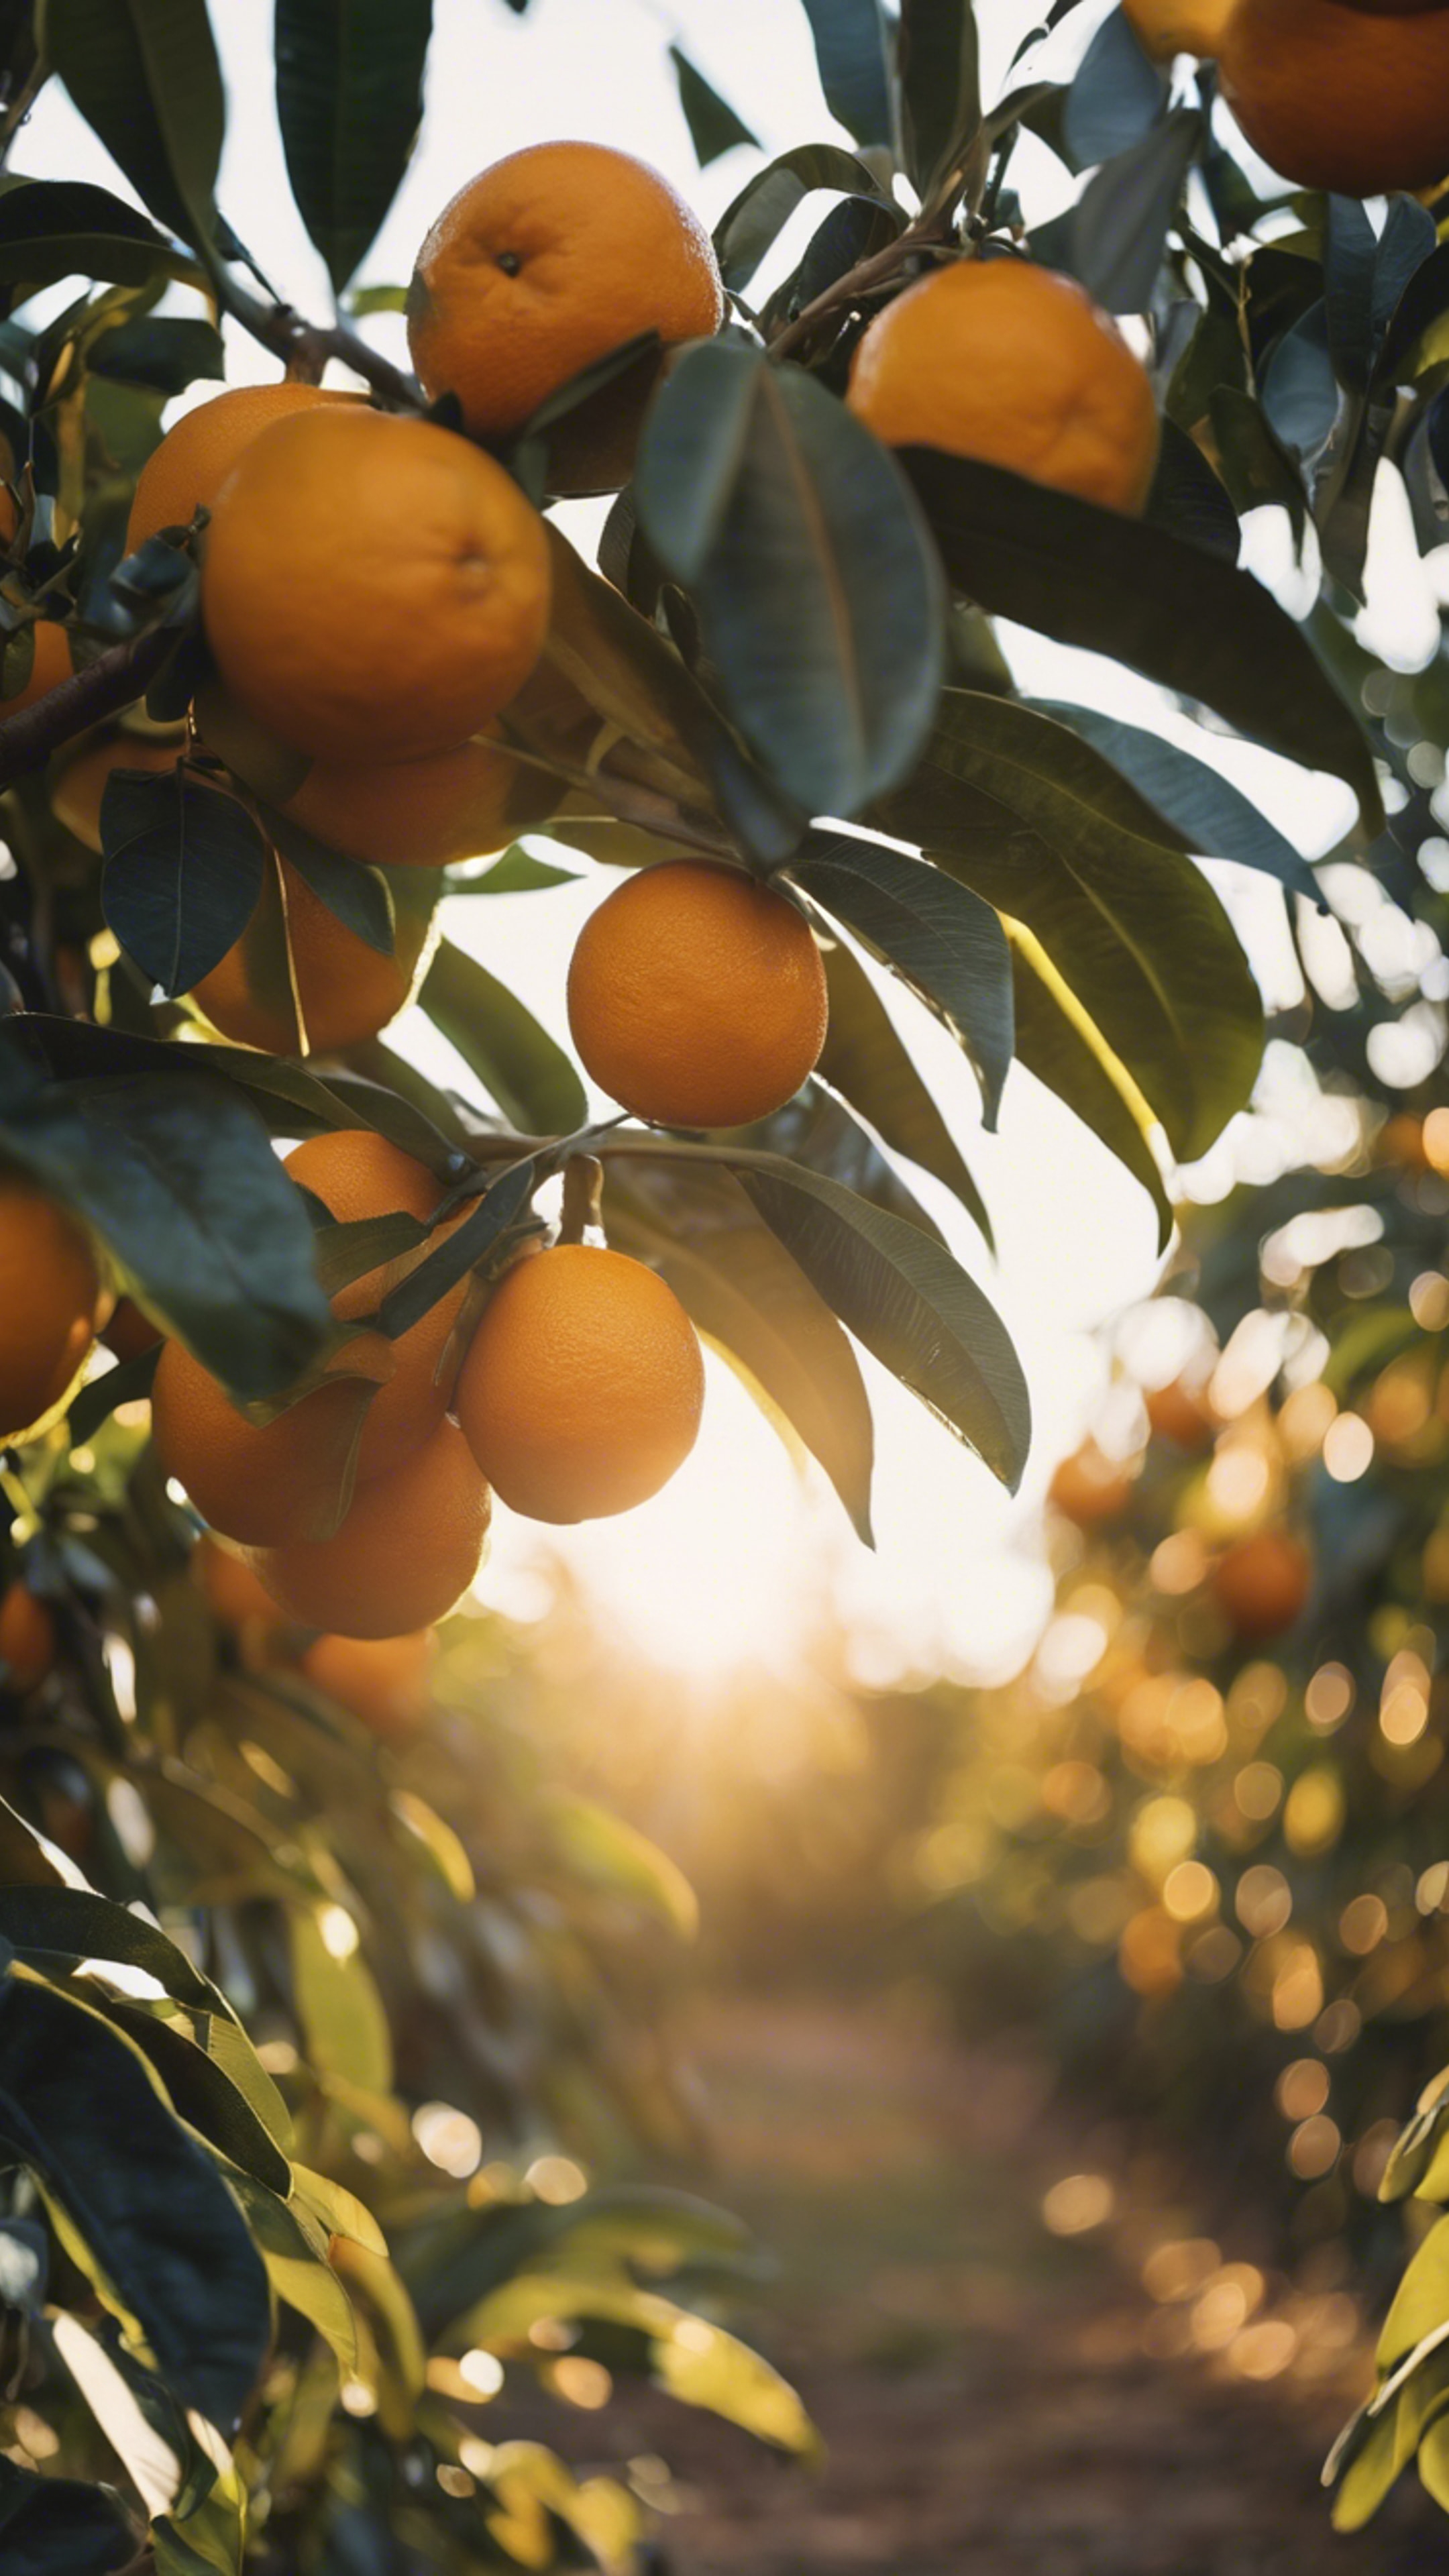 An orange grove in central Florida, with the sun casting a golden hue over ripe oranges ready for harvest. Behang[4bbebc31cb8441e2b681]